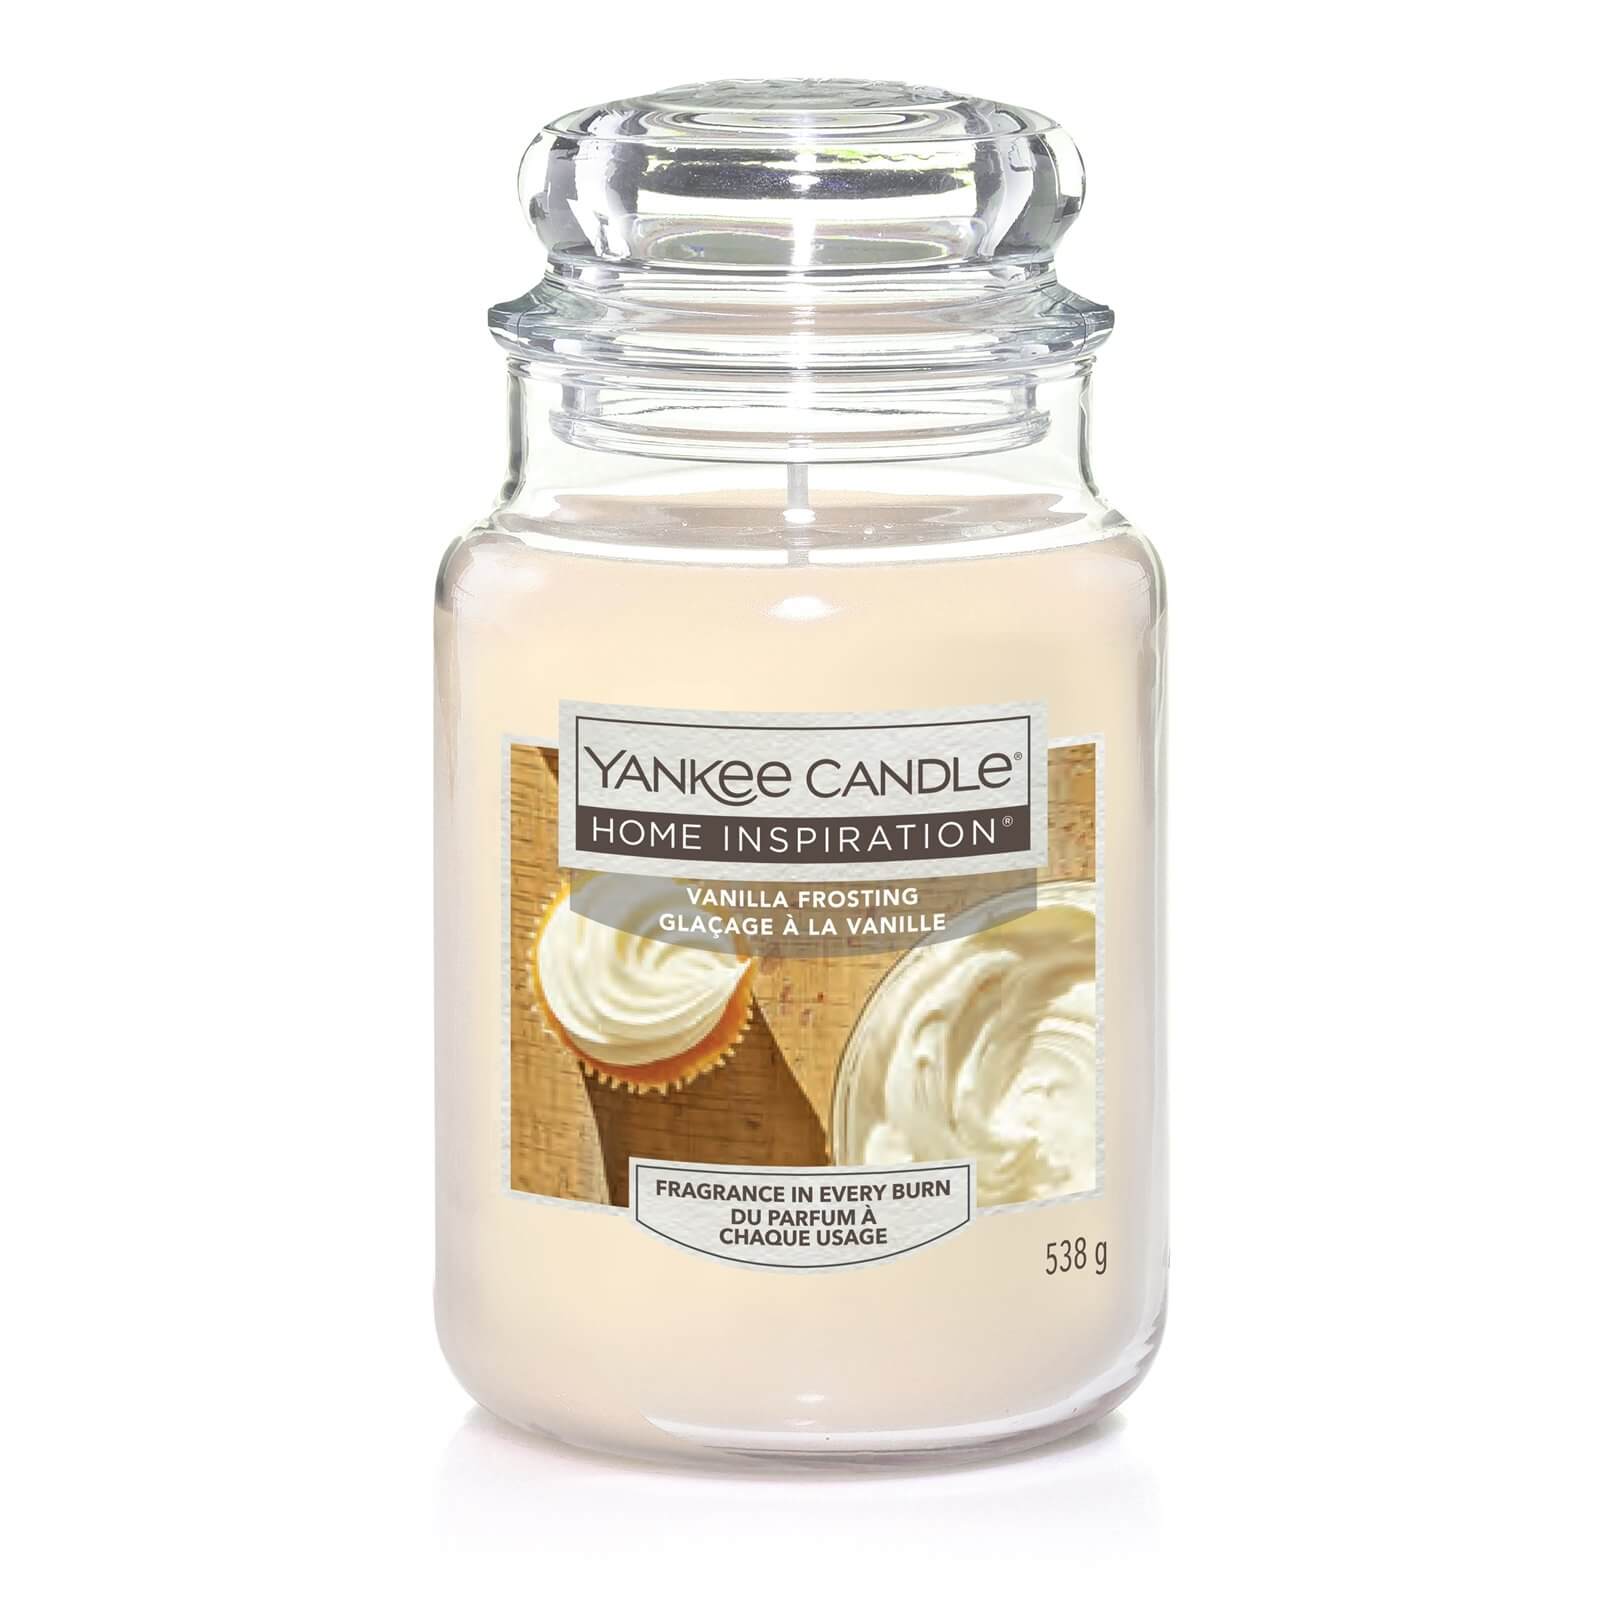 Yankee Candle Home Inspiration Scented Candle - Large Jar - Vanilla Frosting